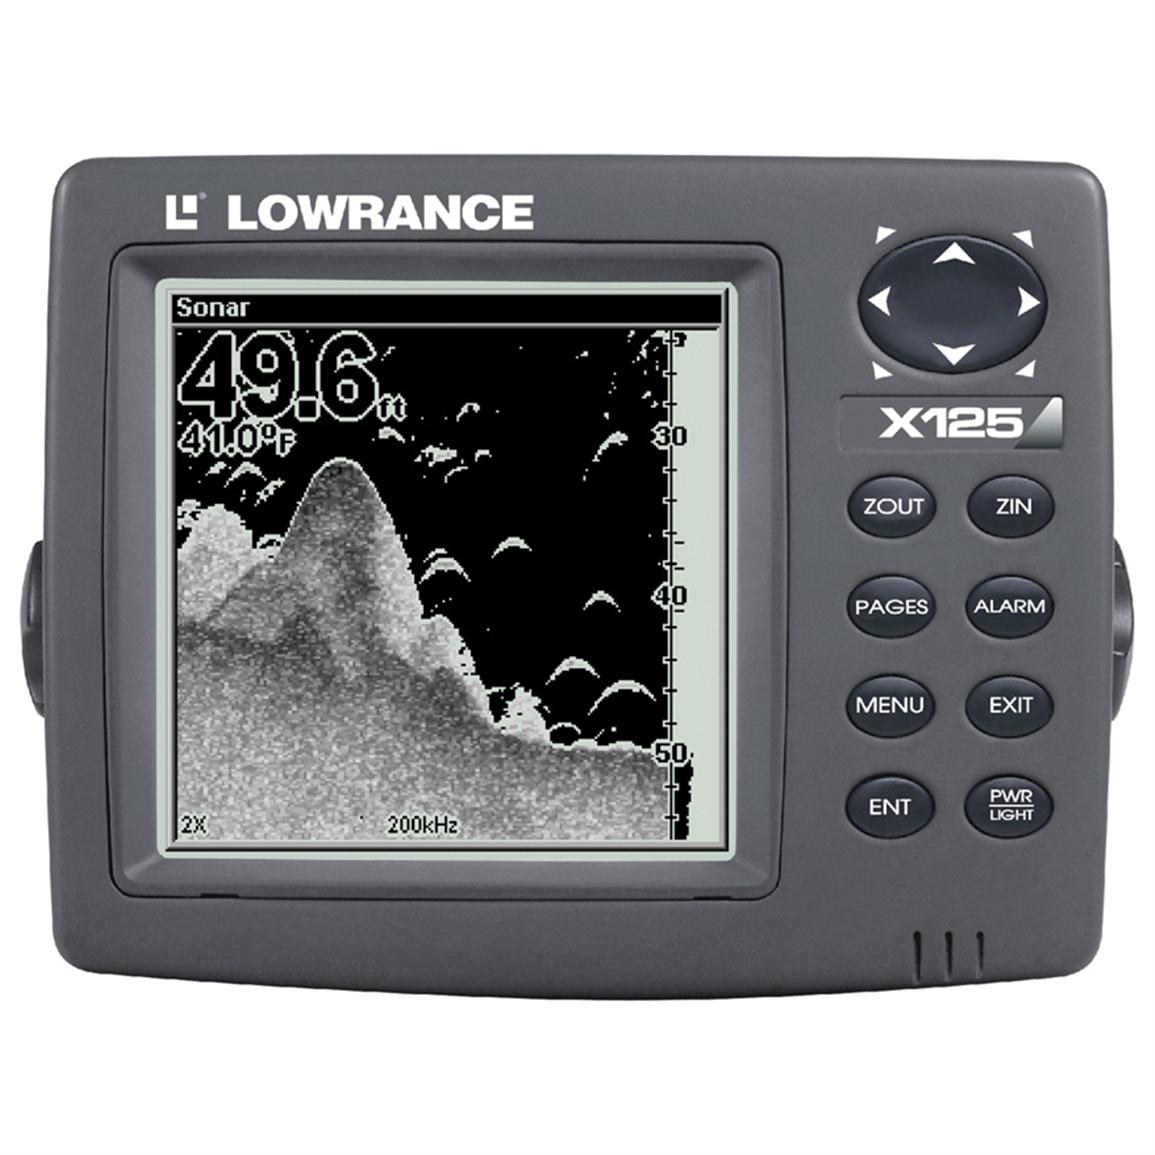 lowrance-x125-fishfinder-without-transducer-123277-fish-finders-at